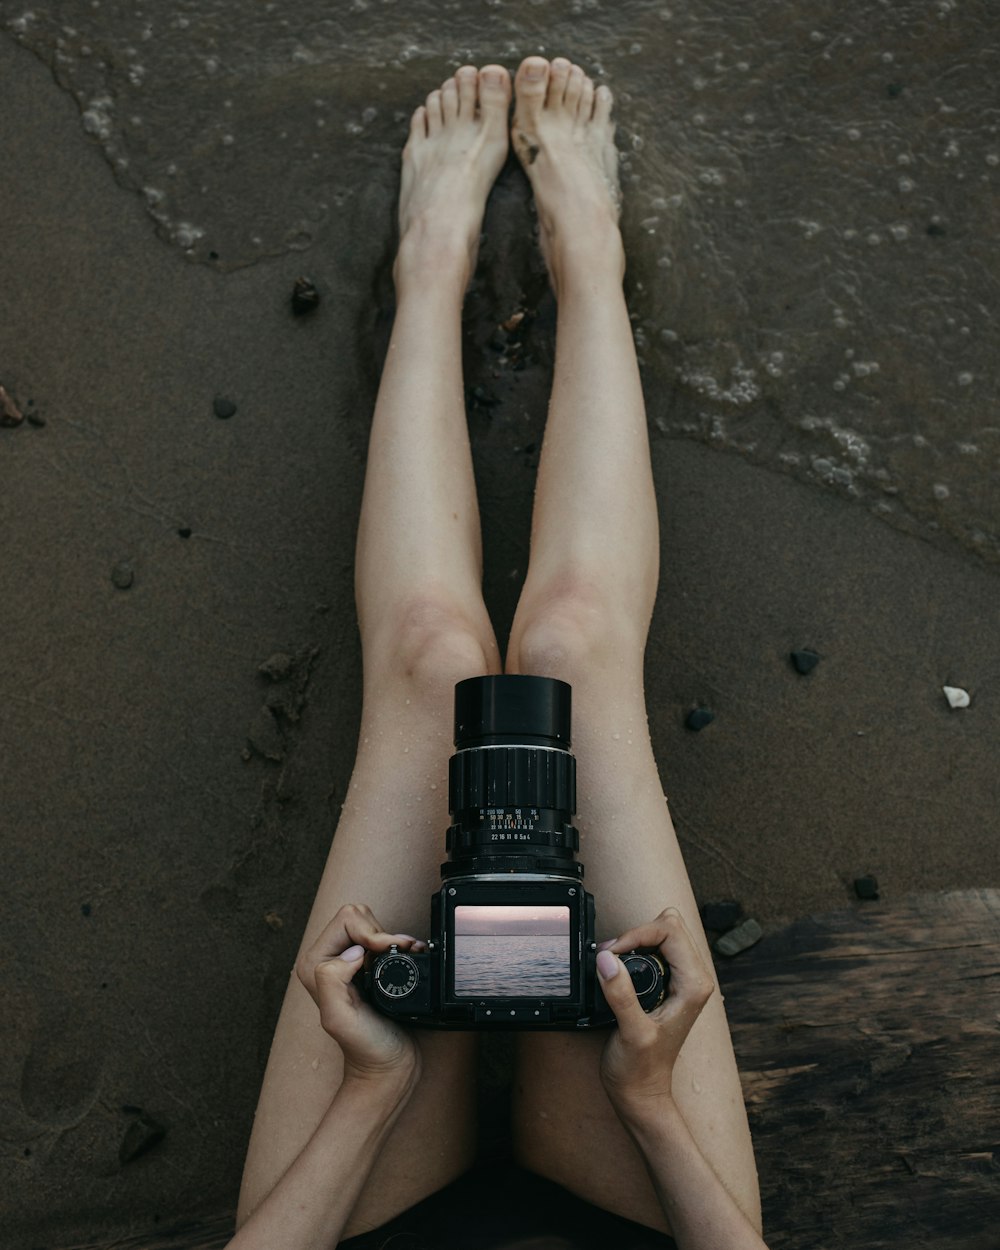 a person's feet on a beach with a watch on